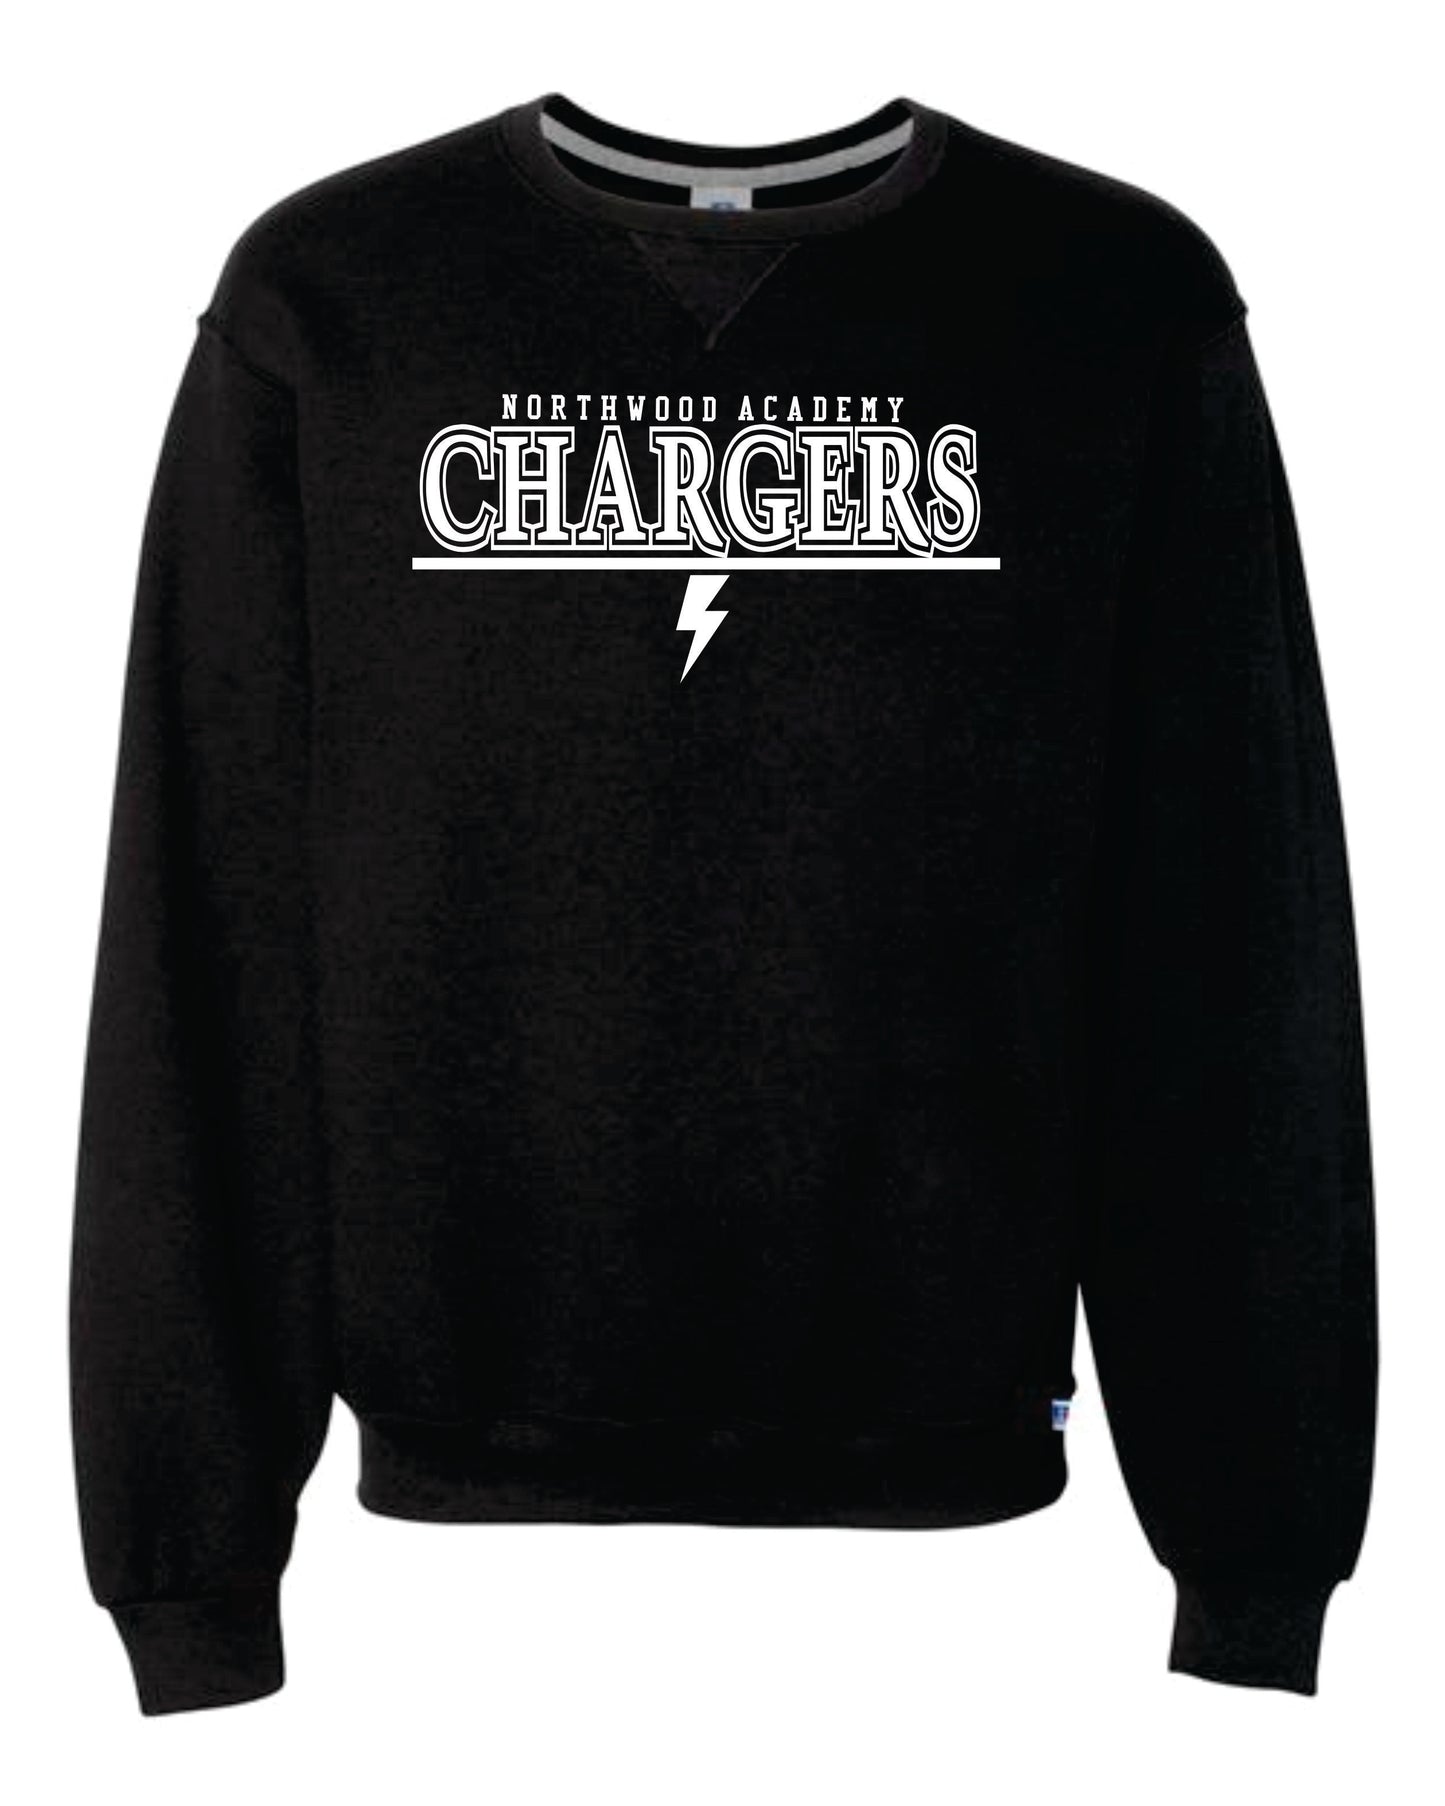 Russell Athletic Dri Power® Crewneck Sweatshirt *new colors and designs*